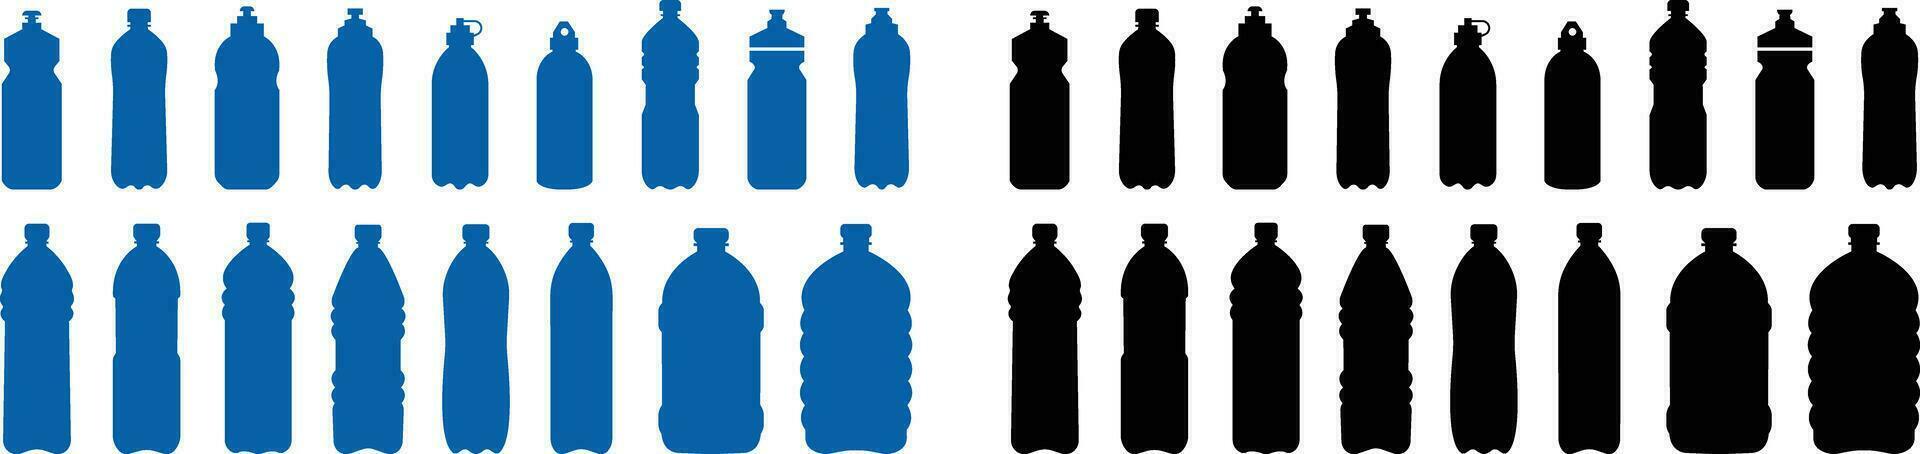 Plastic bottle black or blue icon set. Vector flat style sign . Container water bottle for sport. Natural and healthy lifestyle concept water bottled container liquid